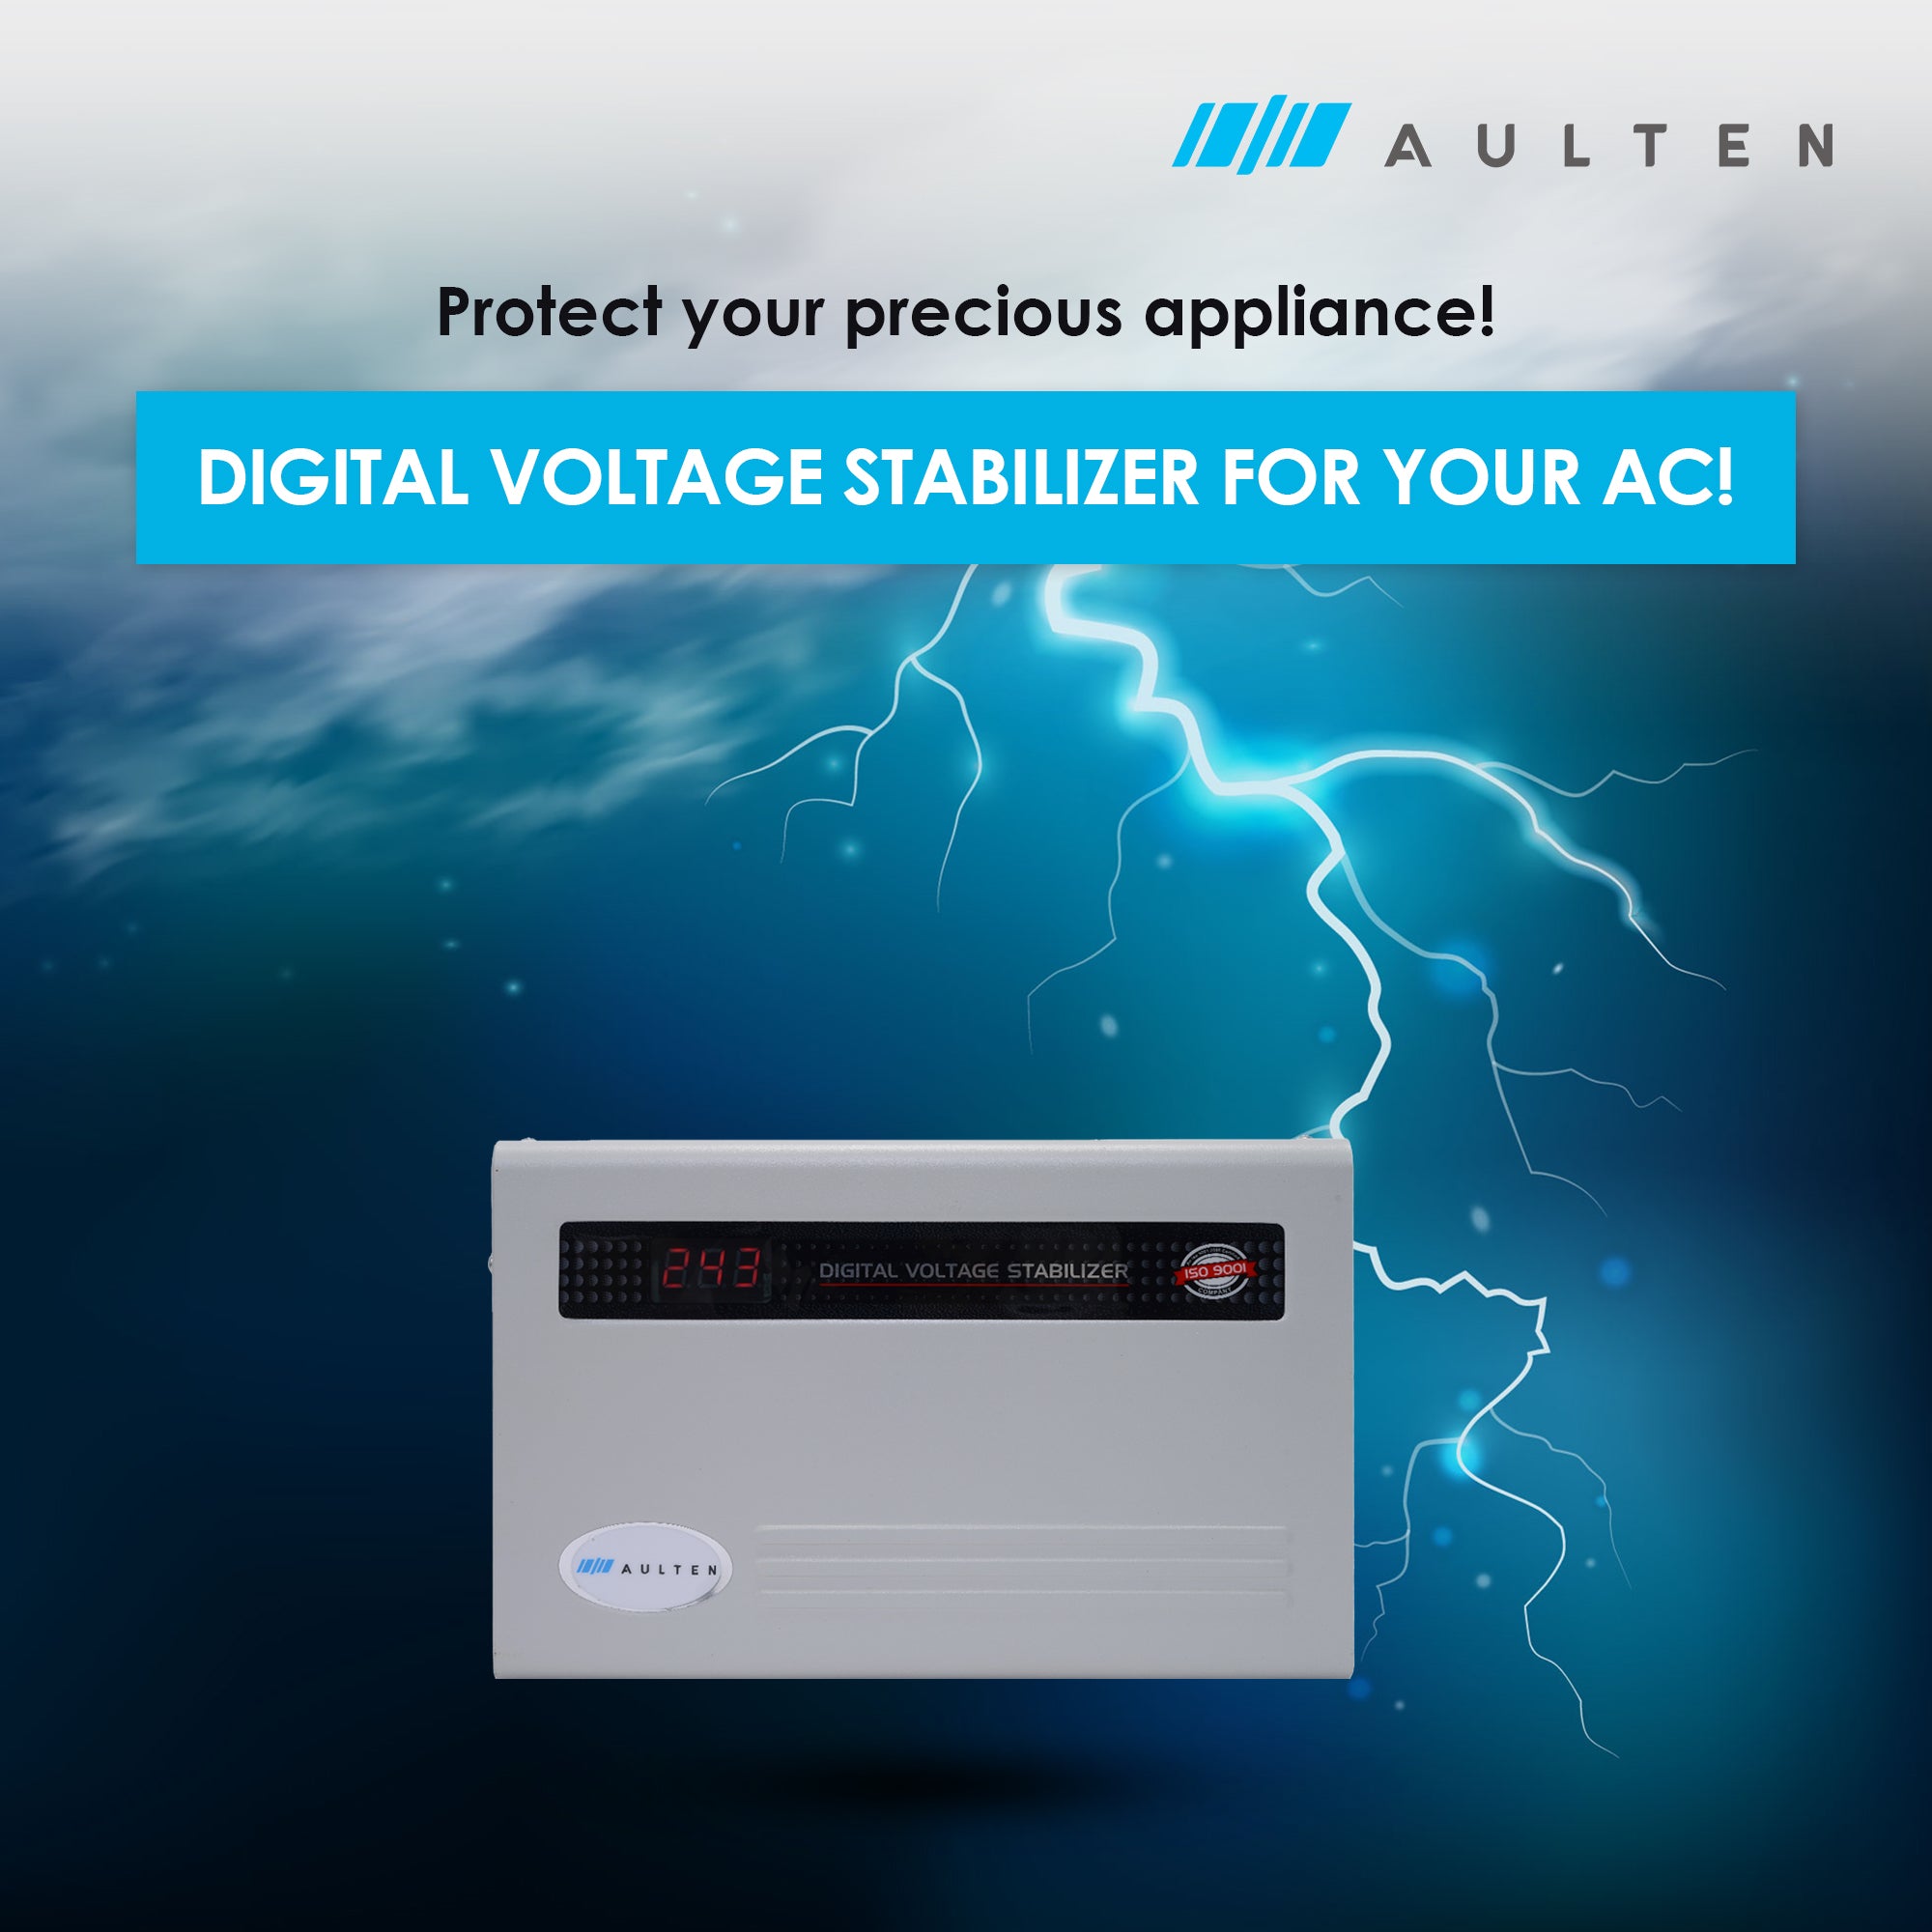 What is power fluctuation and How to solve it with an aulten stabilizer?